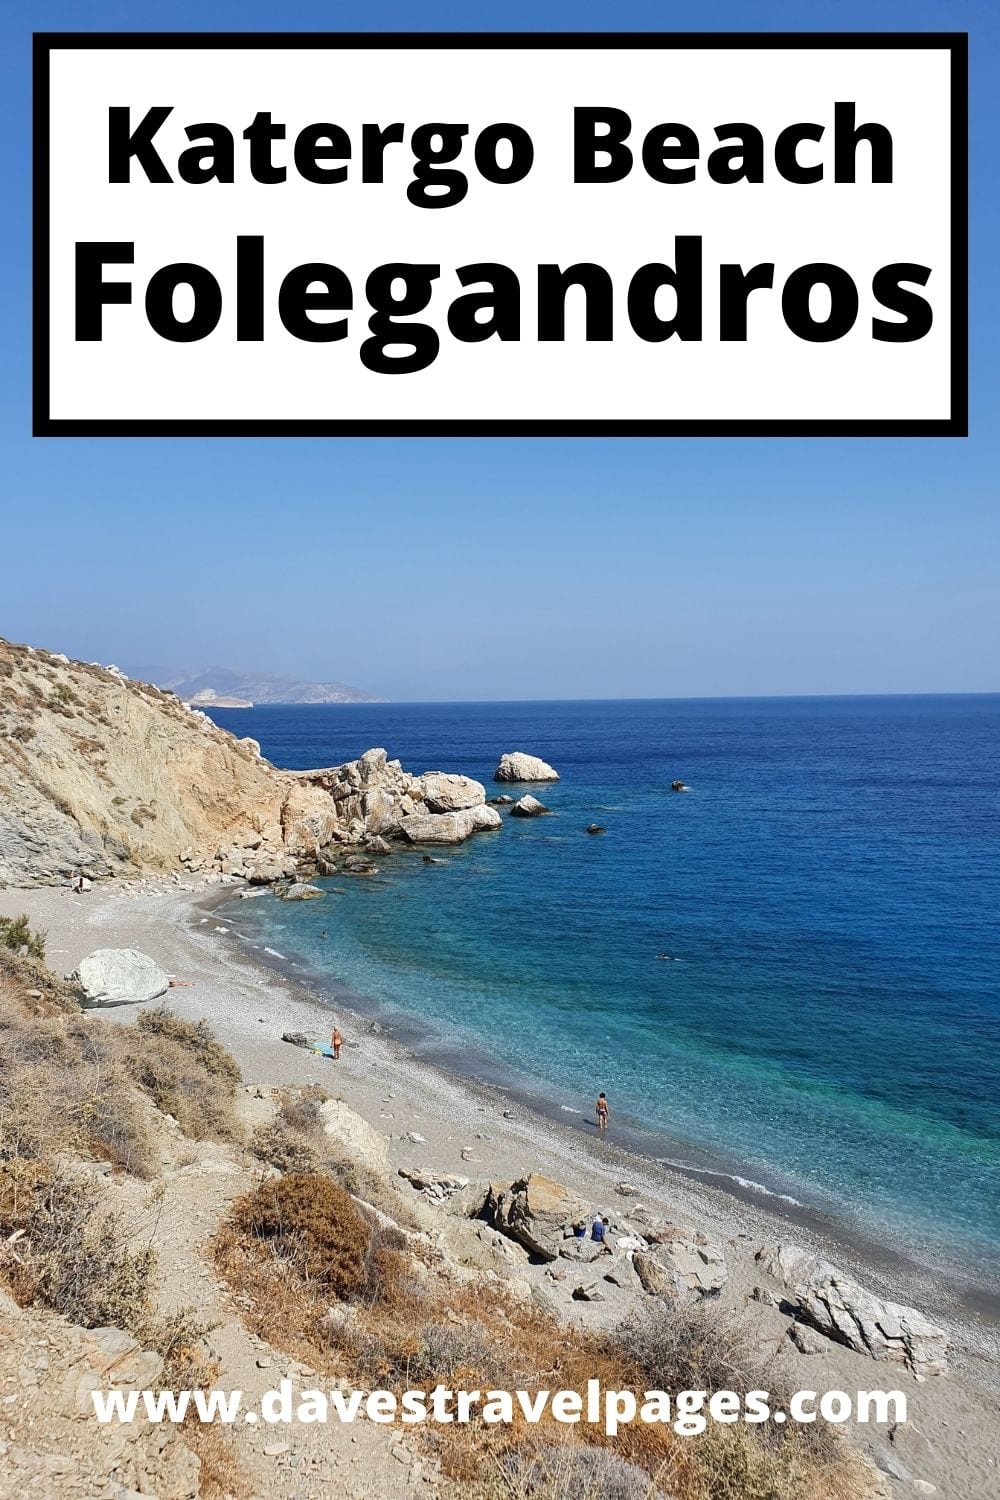 Katergo Beach Folegandros Island Greece - How to get there